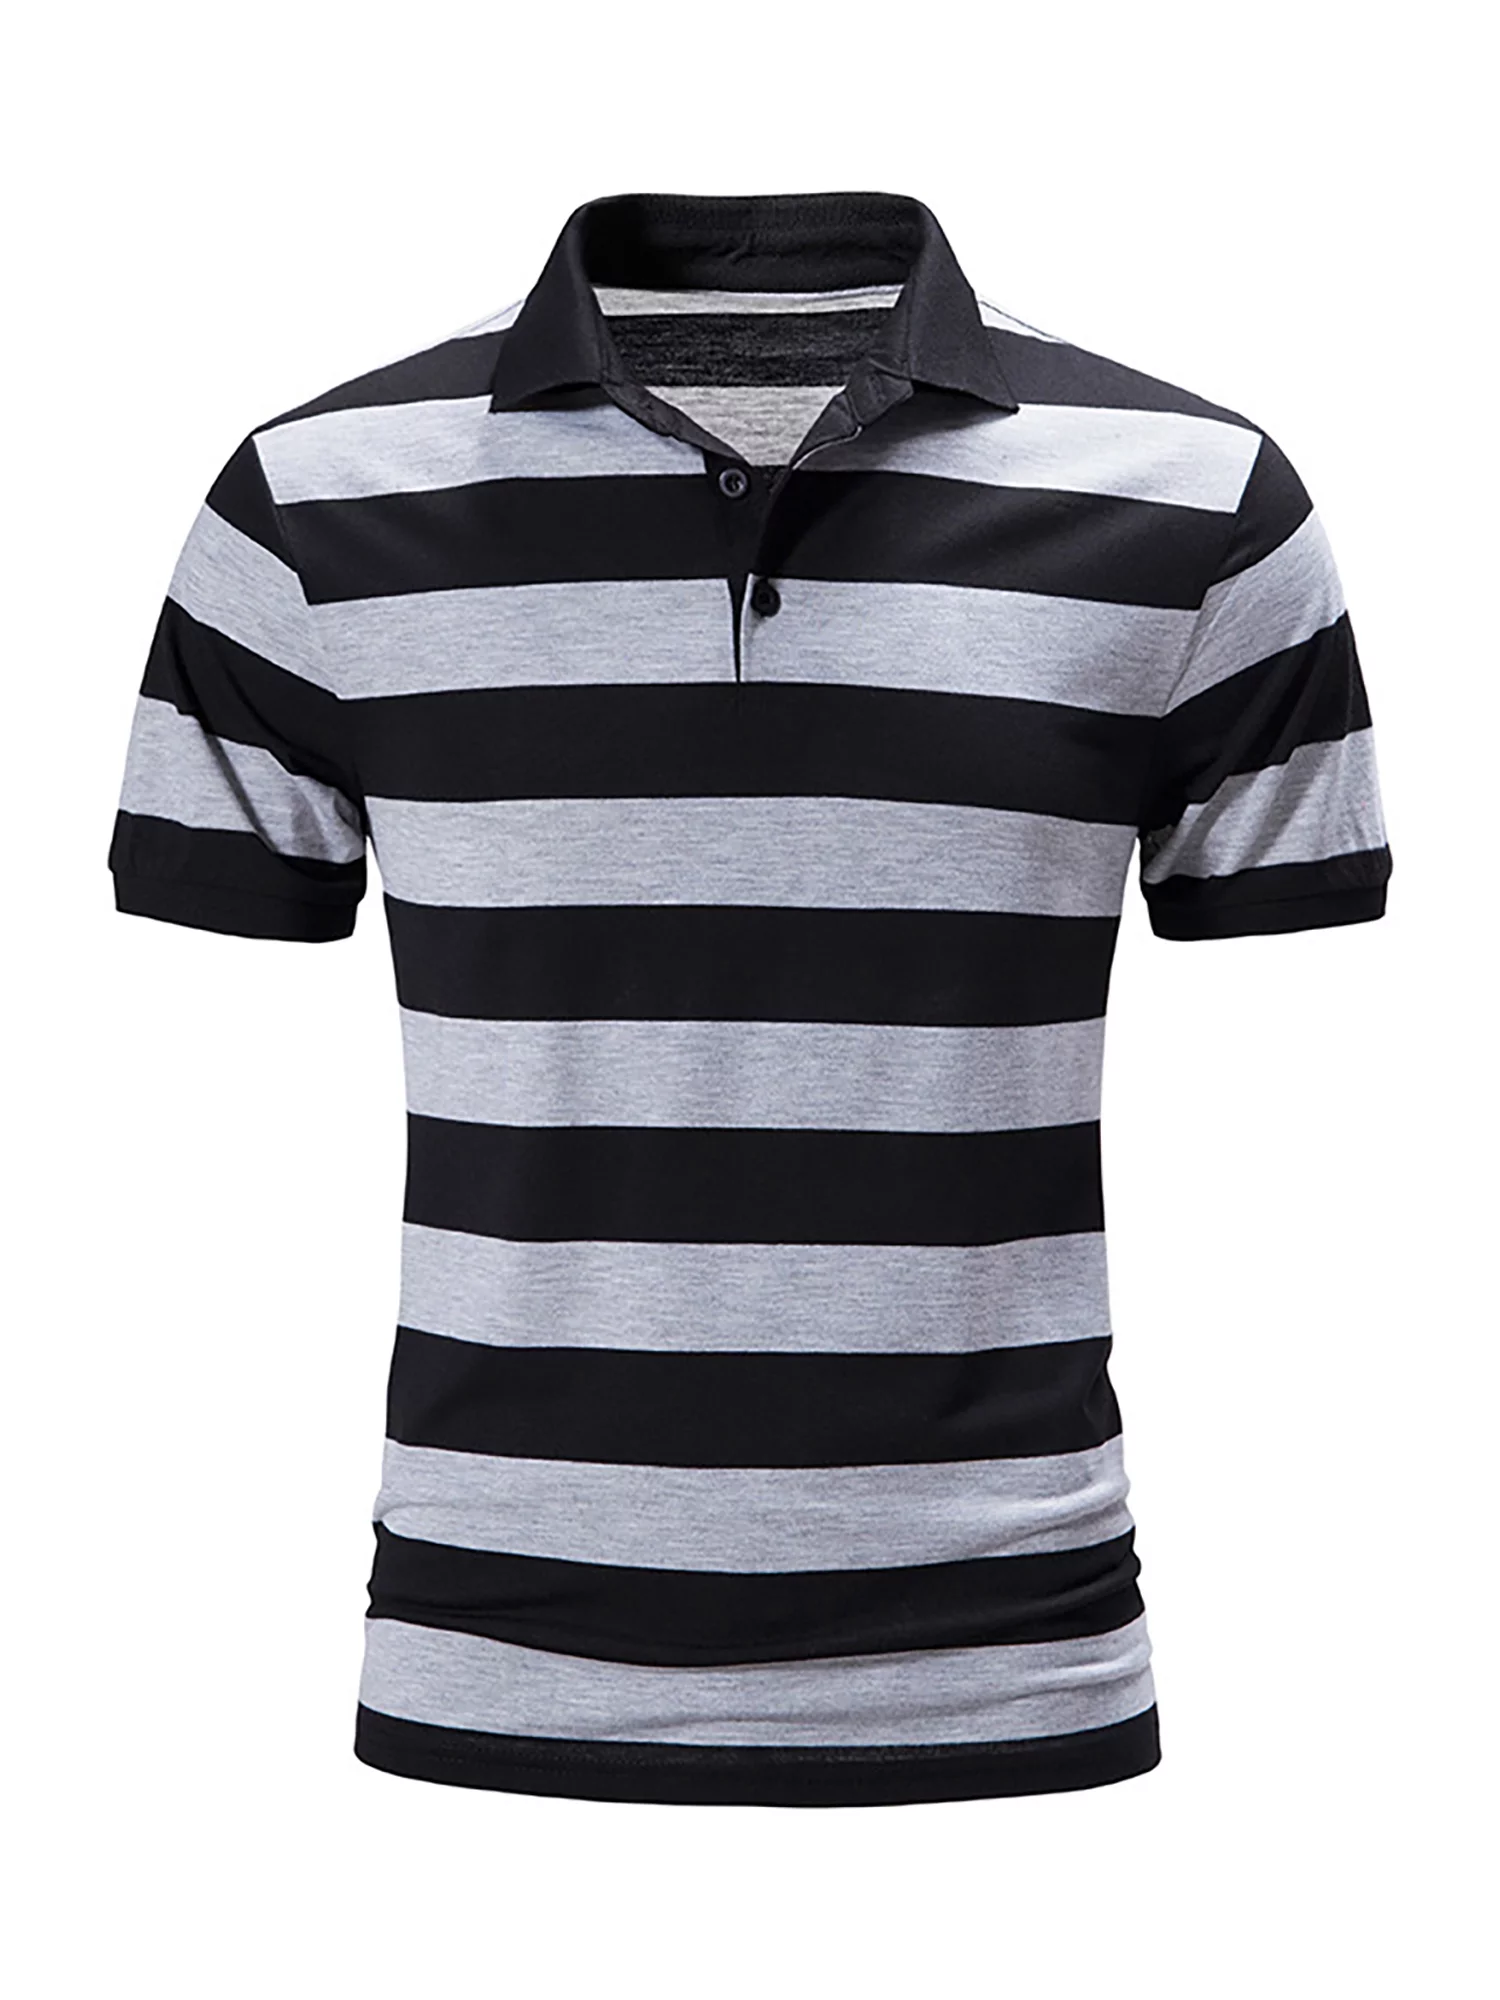 Mens Casual Lapel Neck Polo Shirt Men Classic Fit Tee Striped Sport Button Down Athletic T Shirt